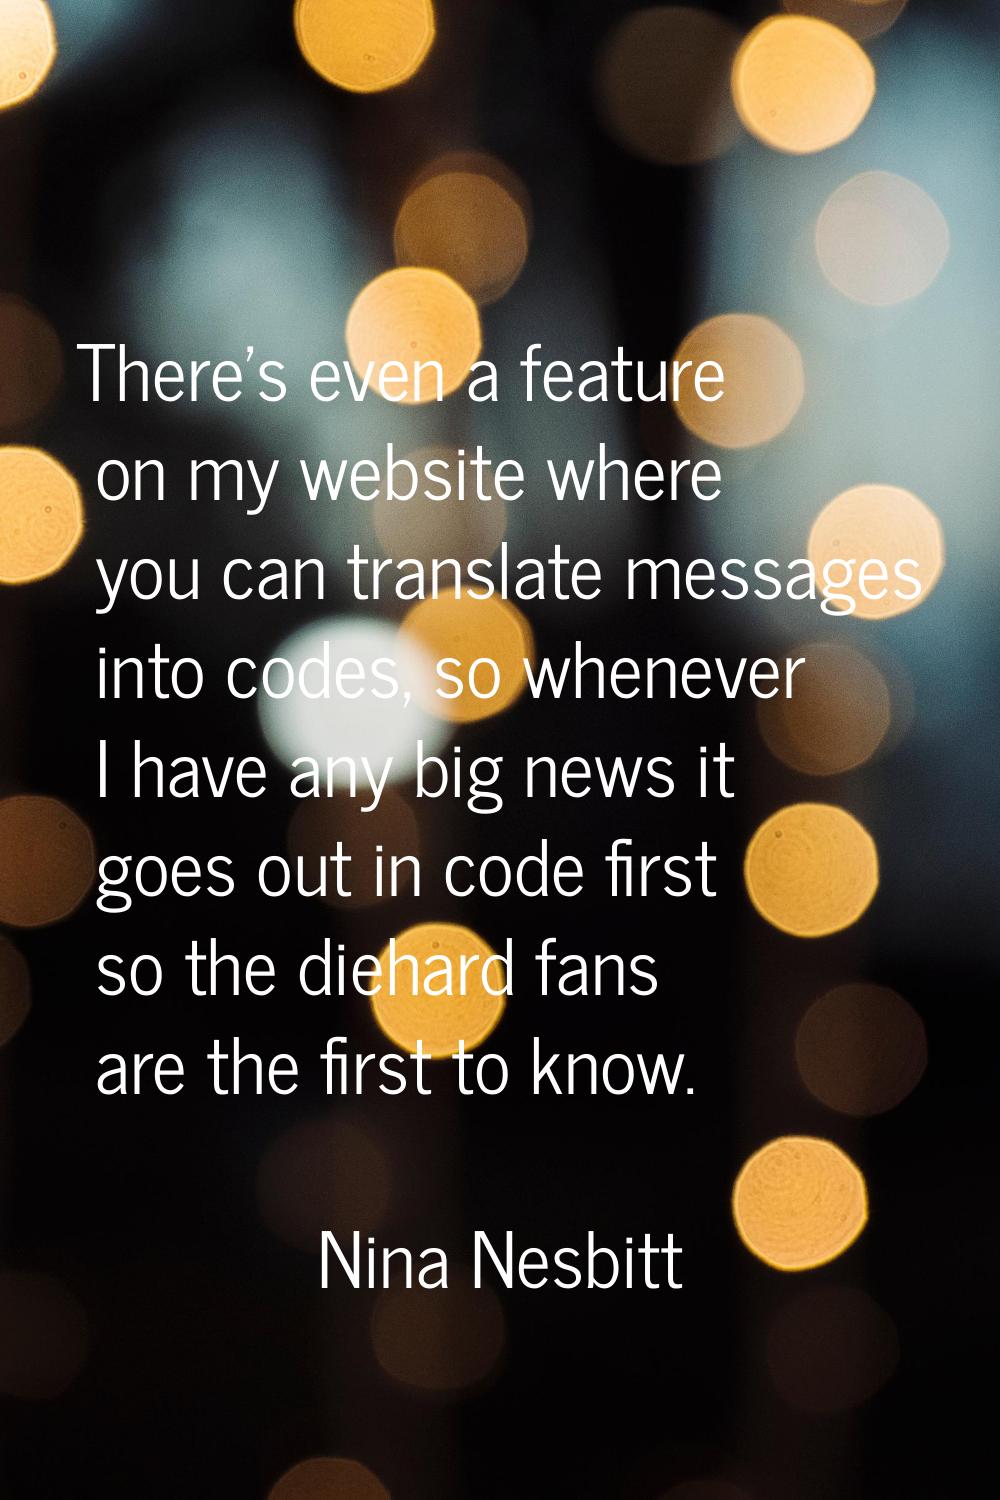 There's even a feature on my website where you can translate messages into codes, so whenever I hav